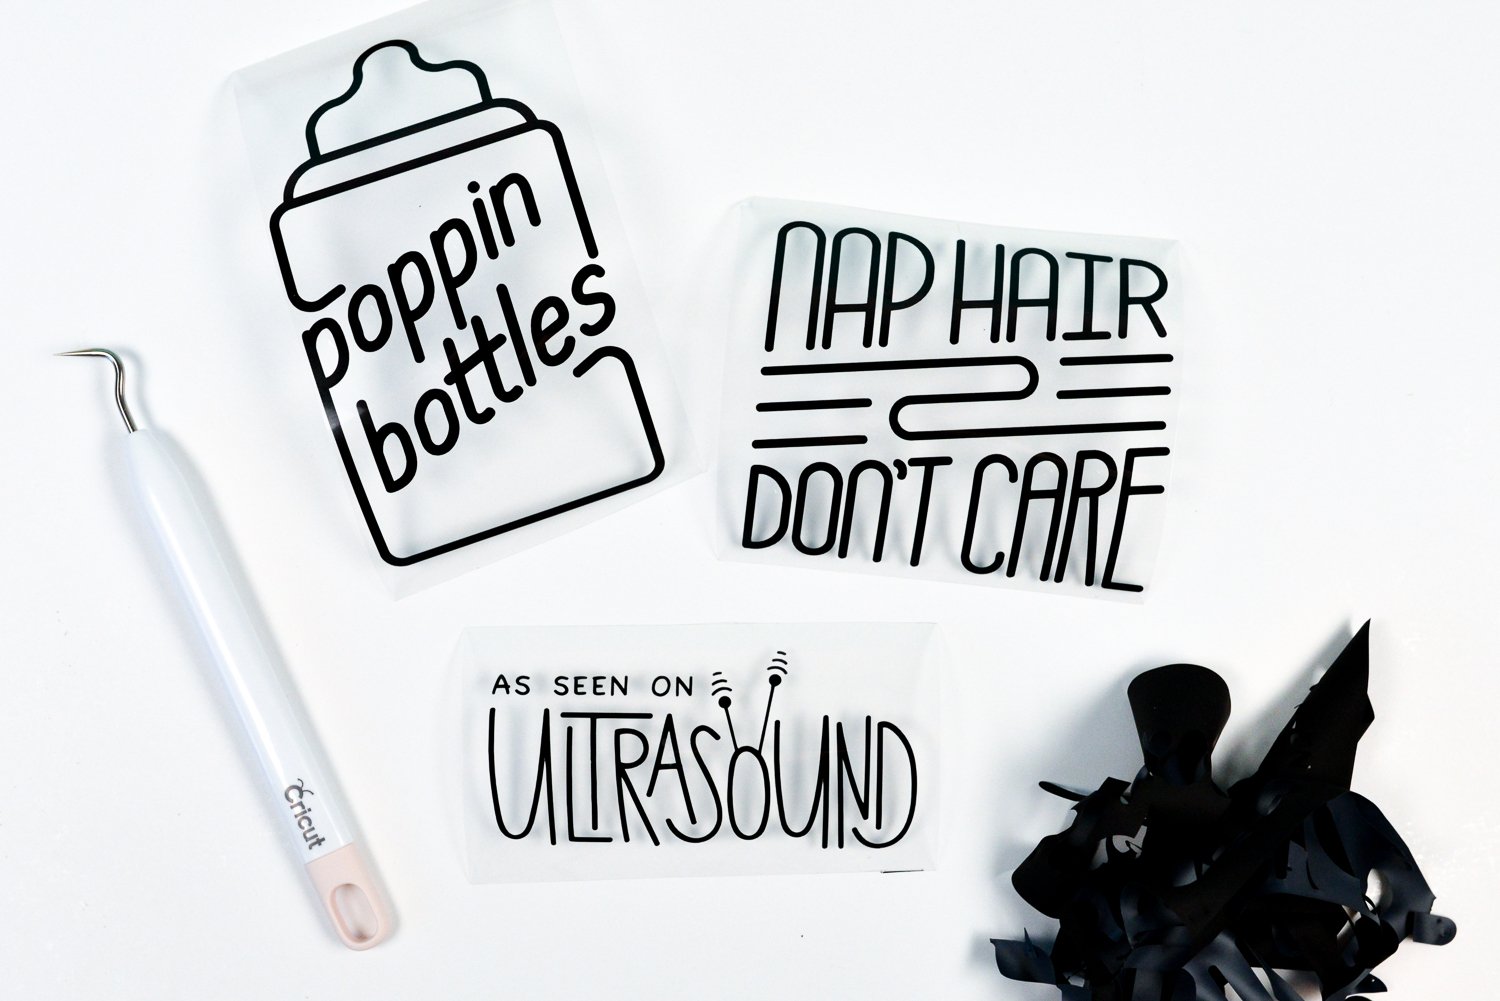 A Cricut weeding tool, a pile of weeded vinyl and three images that say, \" \"Poppin Bottles\", \"Nap Hair Don\'t Care\" and \"As Seen on Ultrasound\"